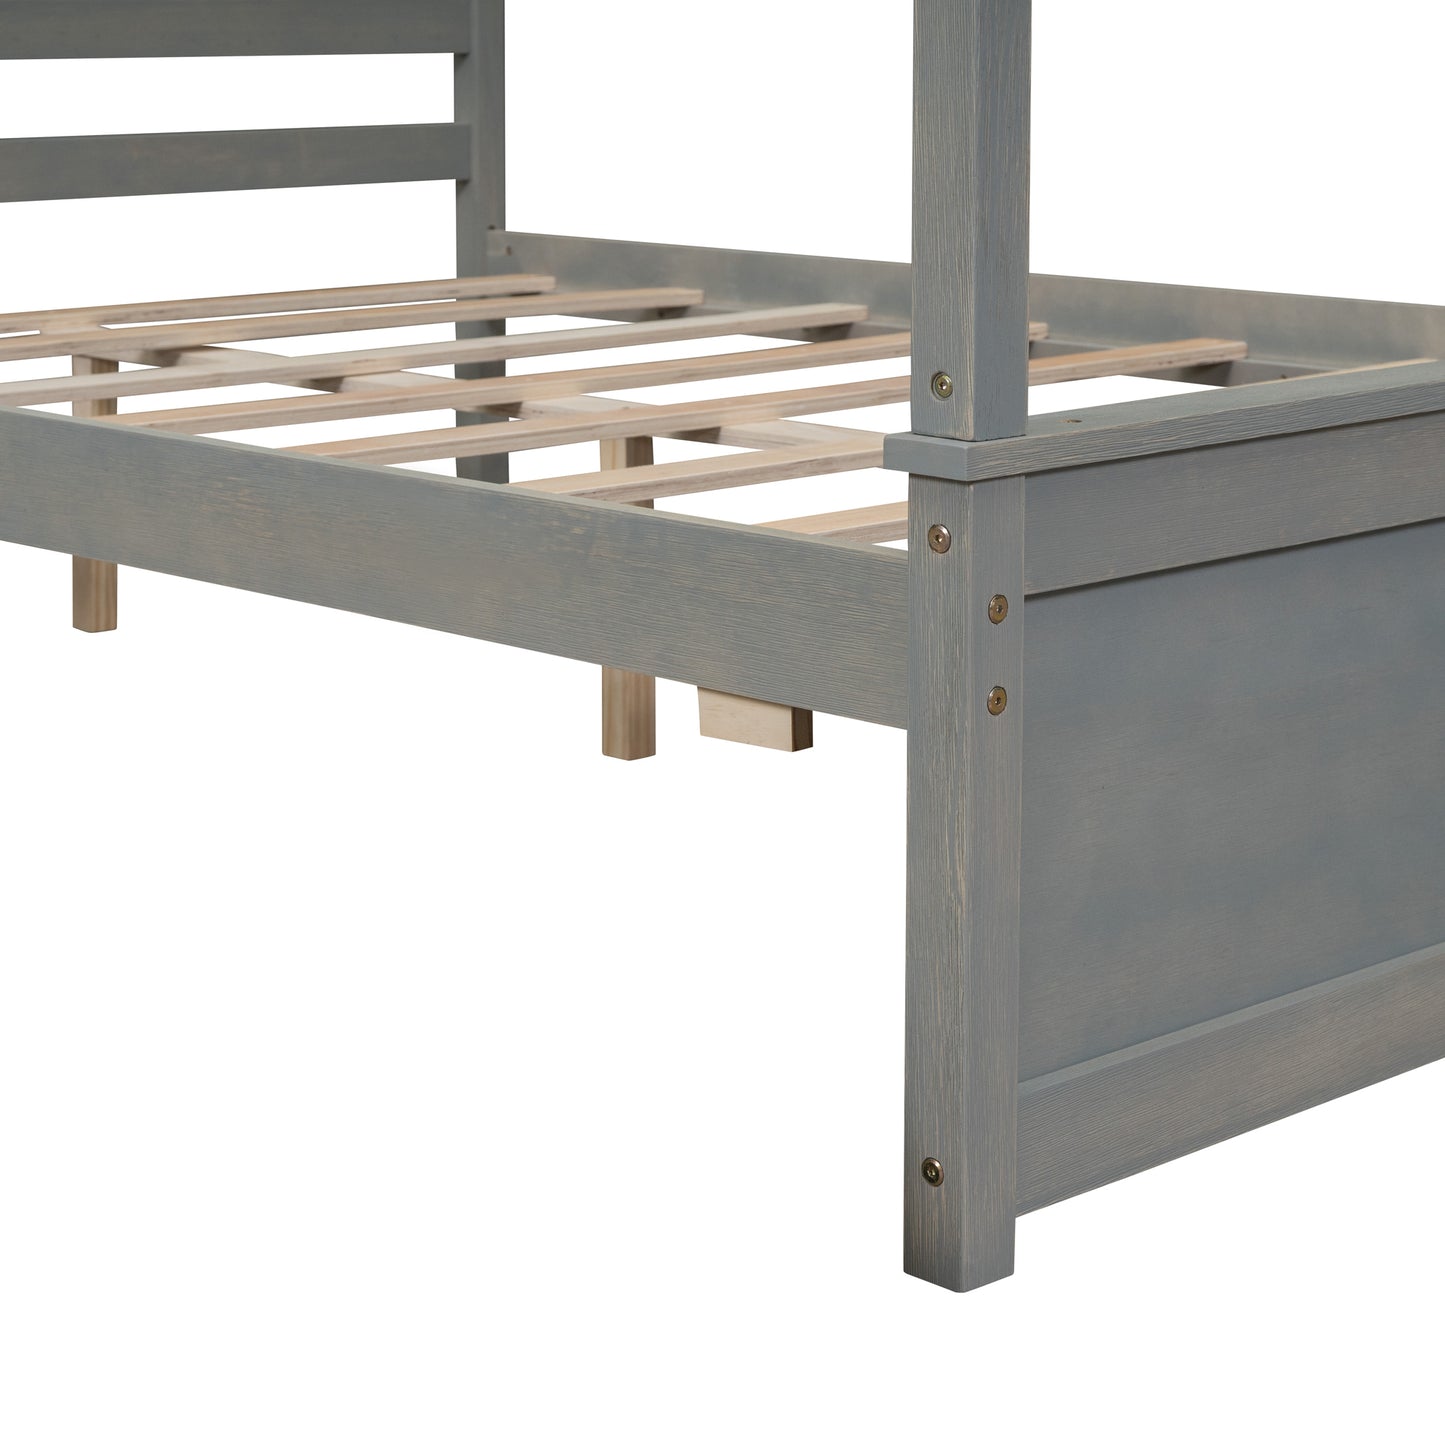 Wood Canopy Bed with two Drawers, Full Size Canopy Platform bed With Support Slats .No Box Spring Needed, Brushed Gray